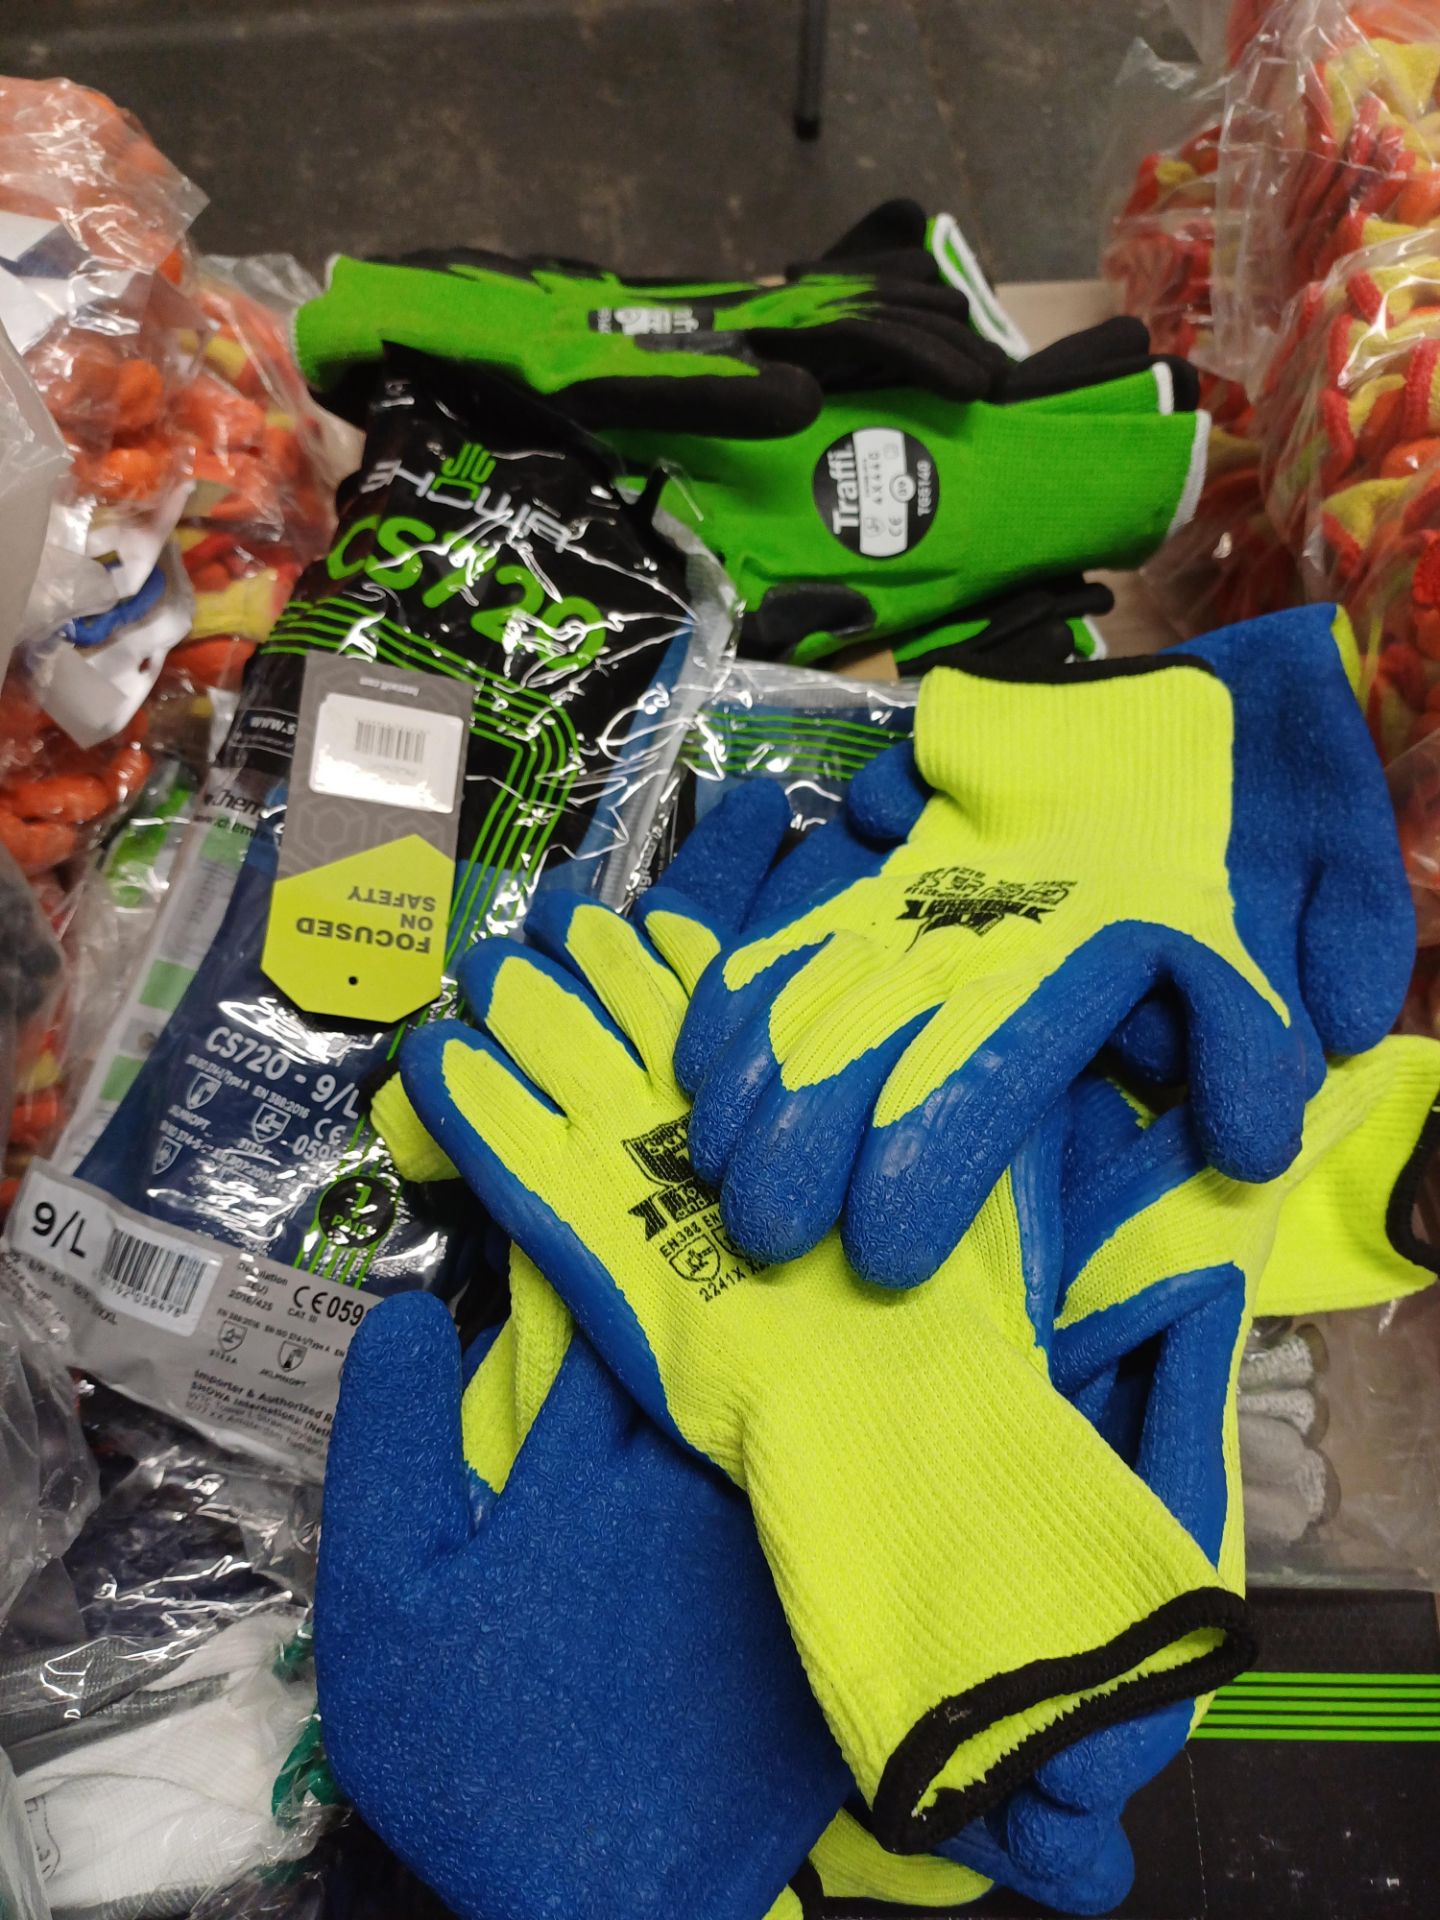 Assortment of Gloves as Shown in Pictures - Image 6 of 8